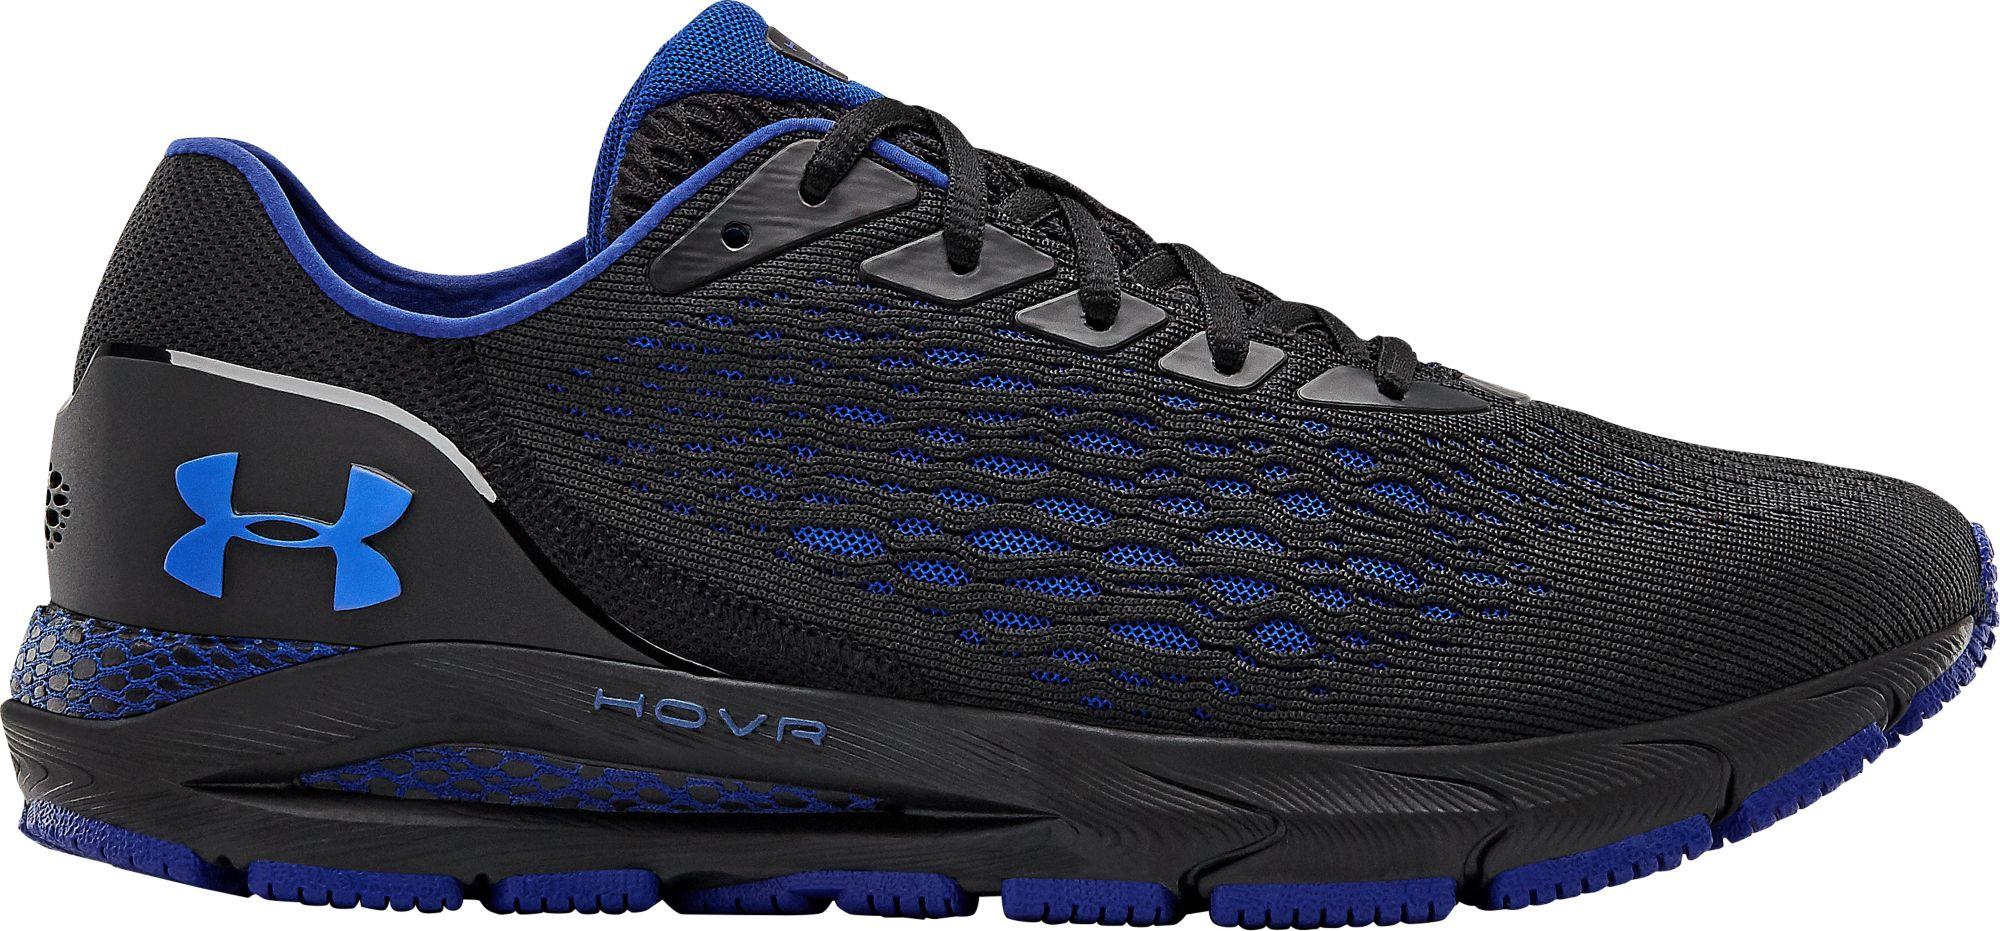 Under Armour Rubber Hovr Sonic 3 Running Shoes in Black for Men - Lyst